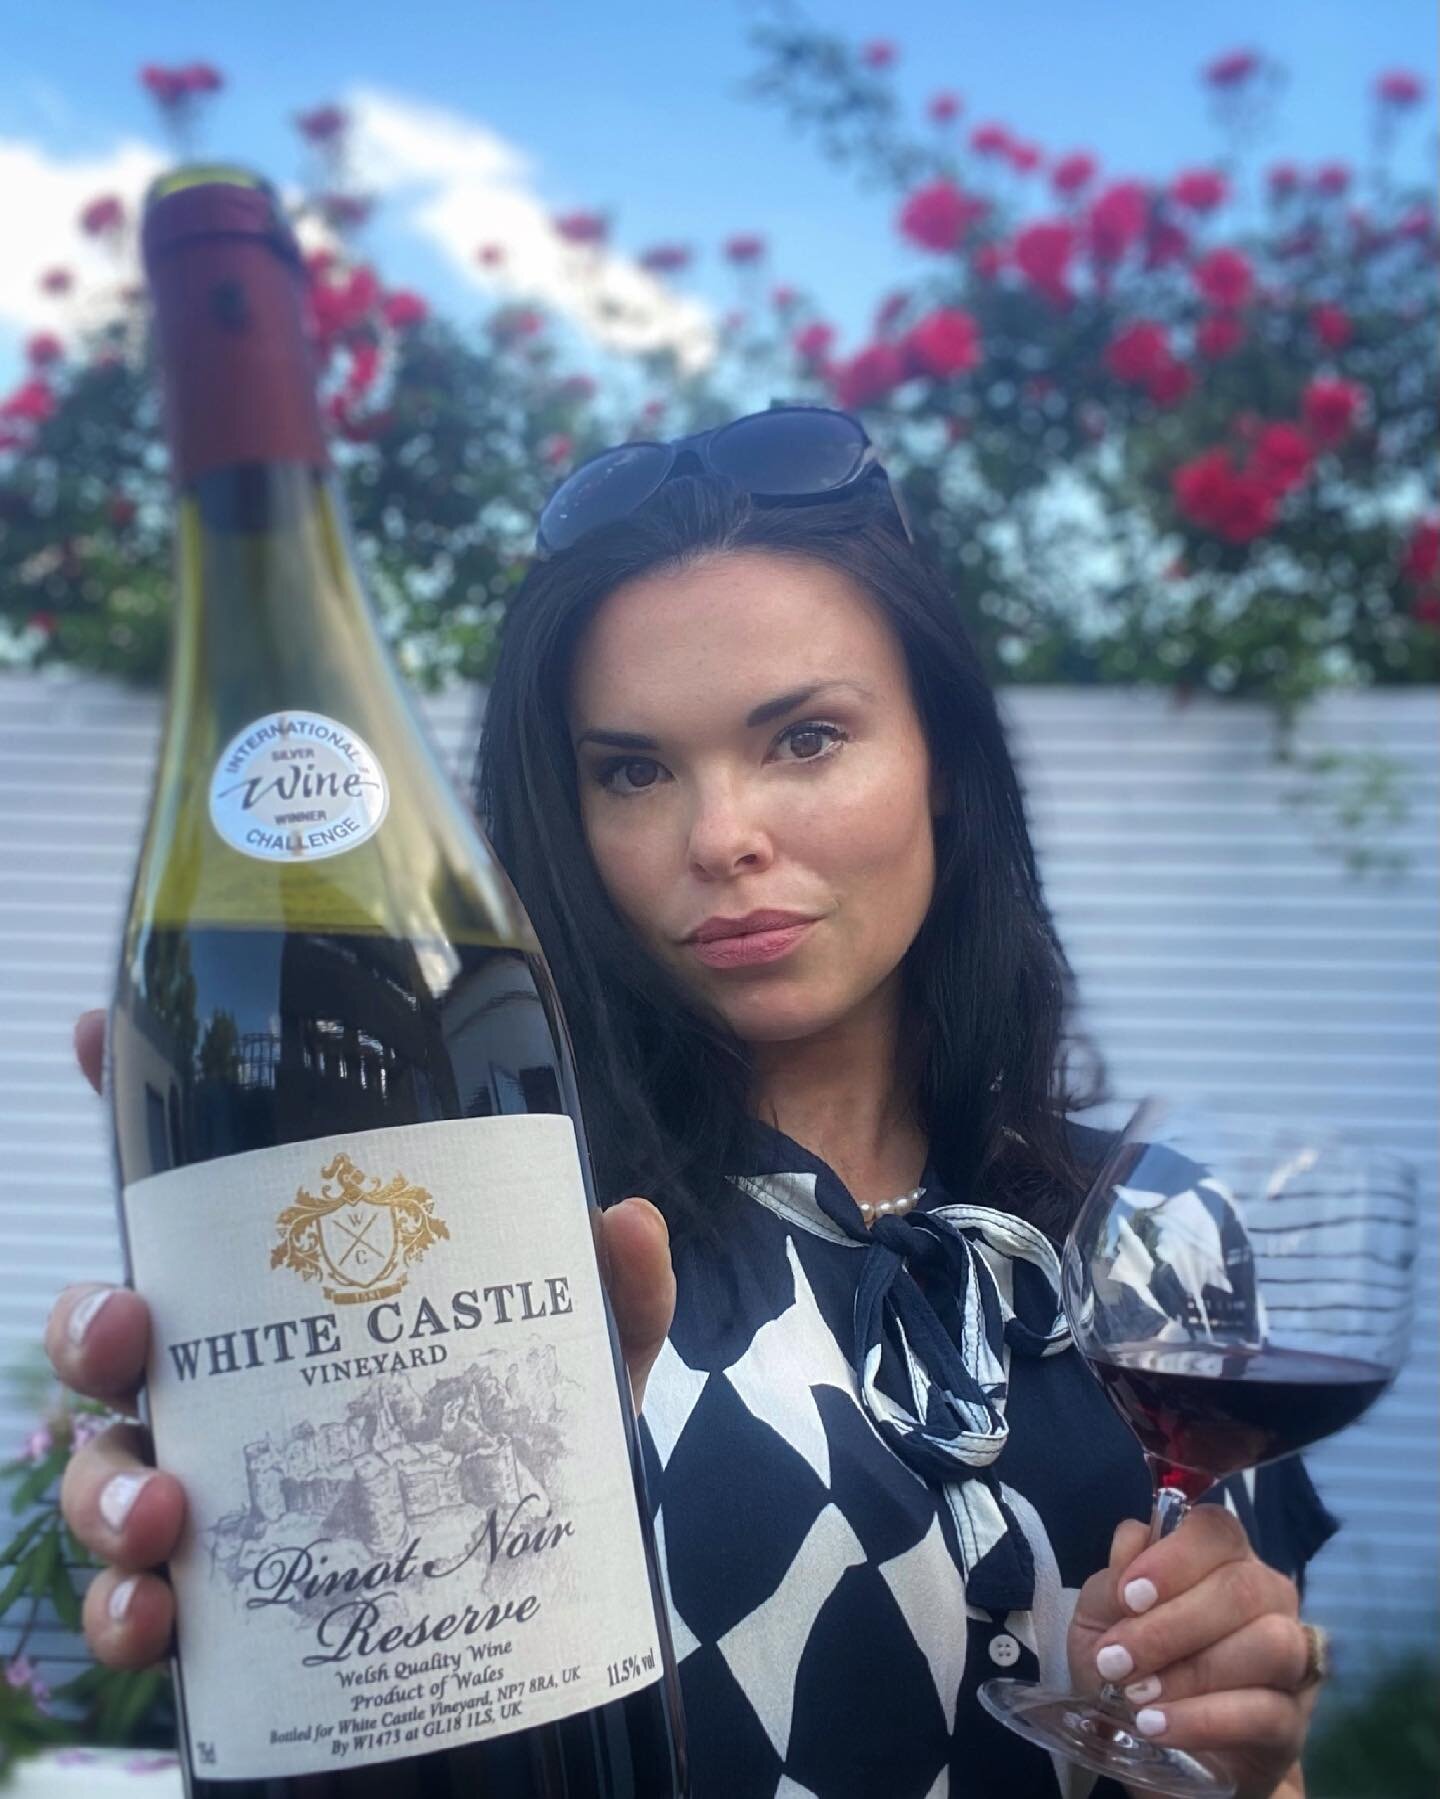 🍷 It&rsquo;s time to get serious about #WelshWine - because damn it, it deserves it. Especially when it&rsquo;s as delicious as the award-winning #PinotNoir from #WhiteCastle @welshwines 

🥈In a record-breaking year #Wales took home 6 medals from t